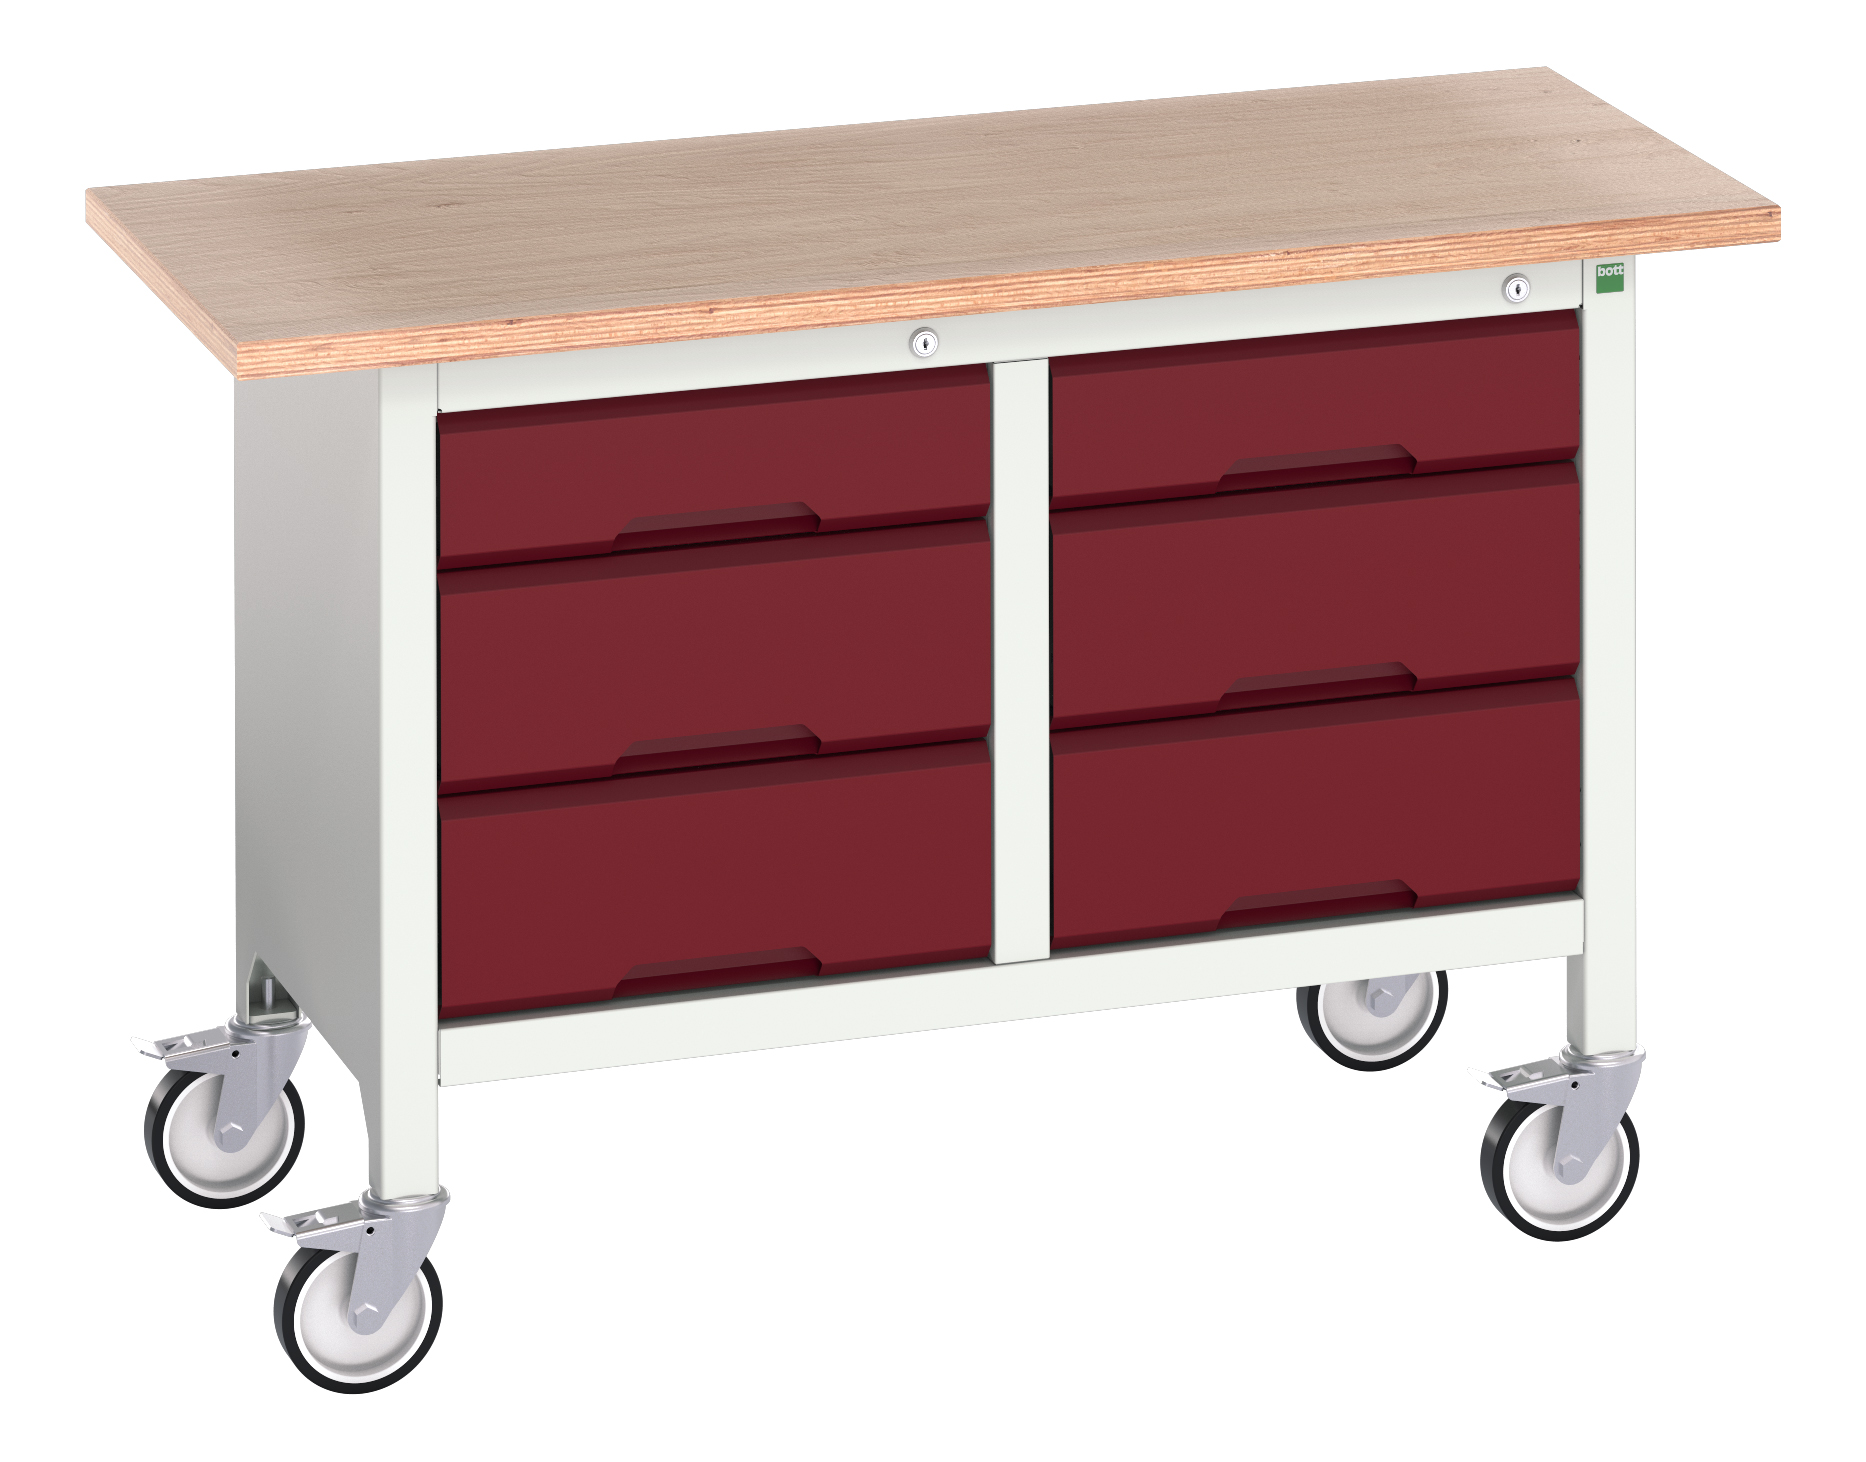 Bott Verso Mobile Storage Bench With 3 Drawer Cabinet / 3 Drawer Cabinet - 16923204.24